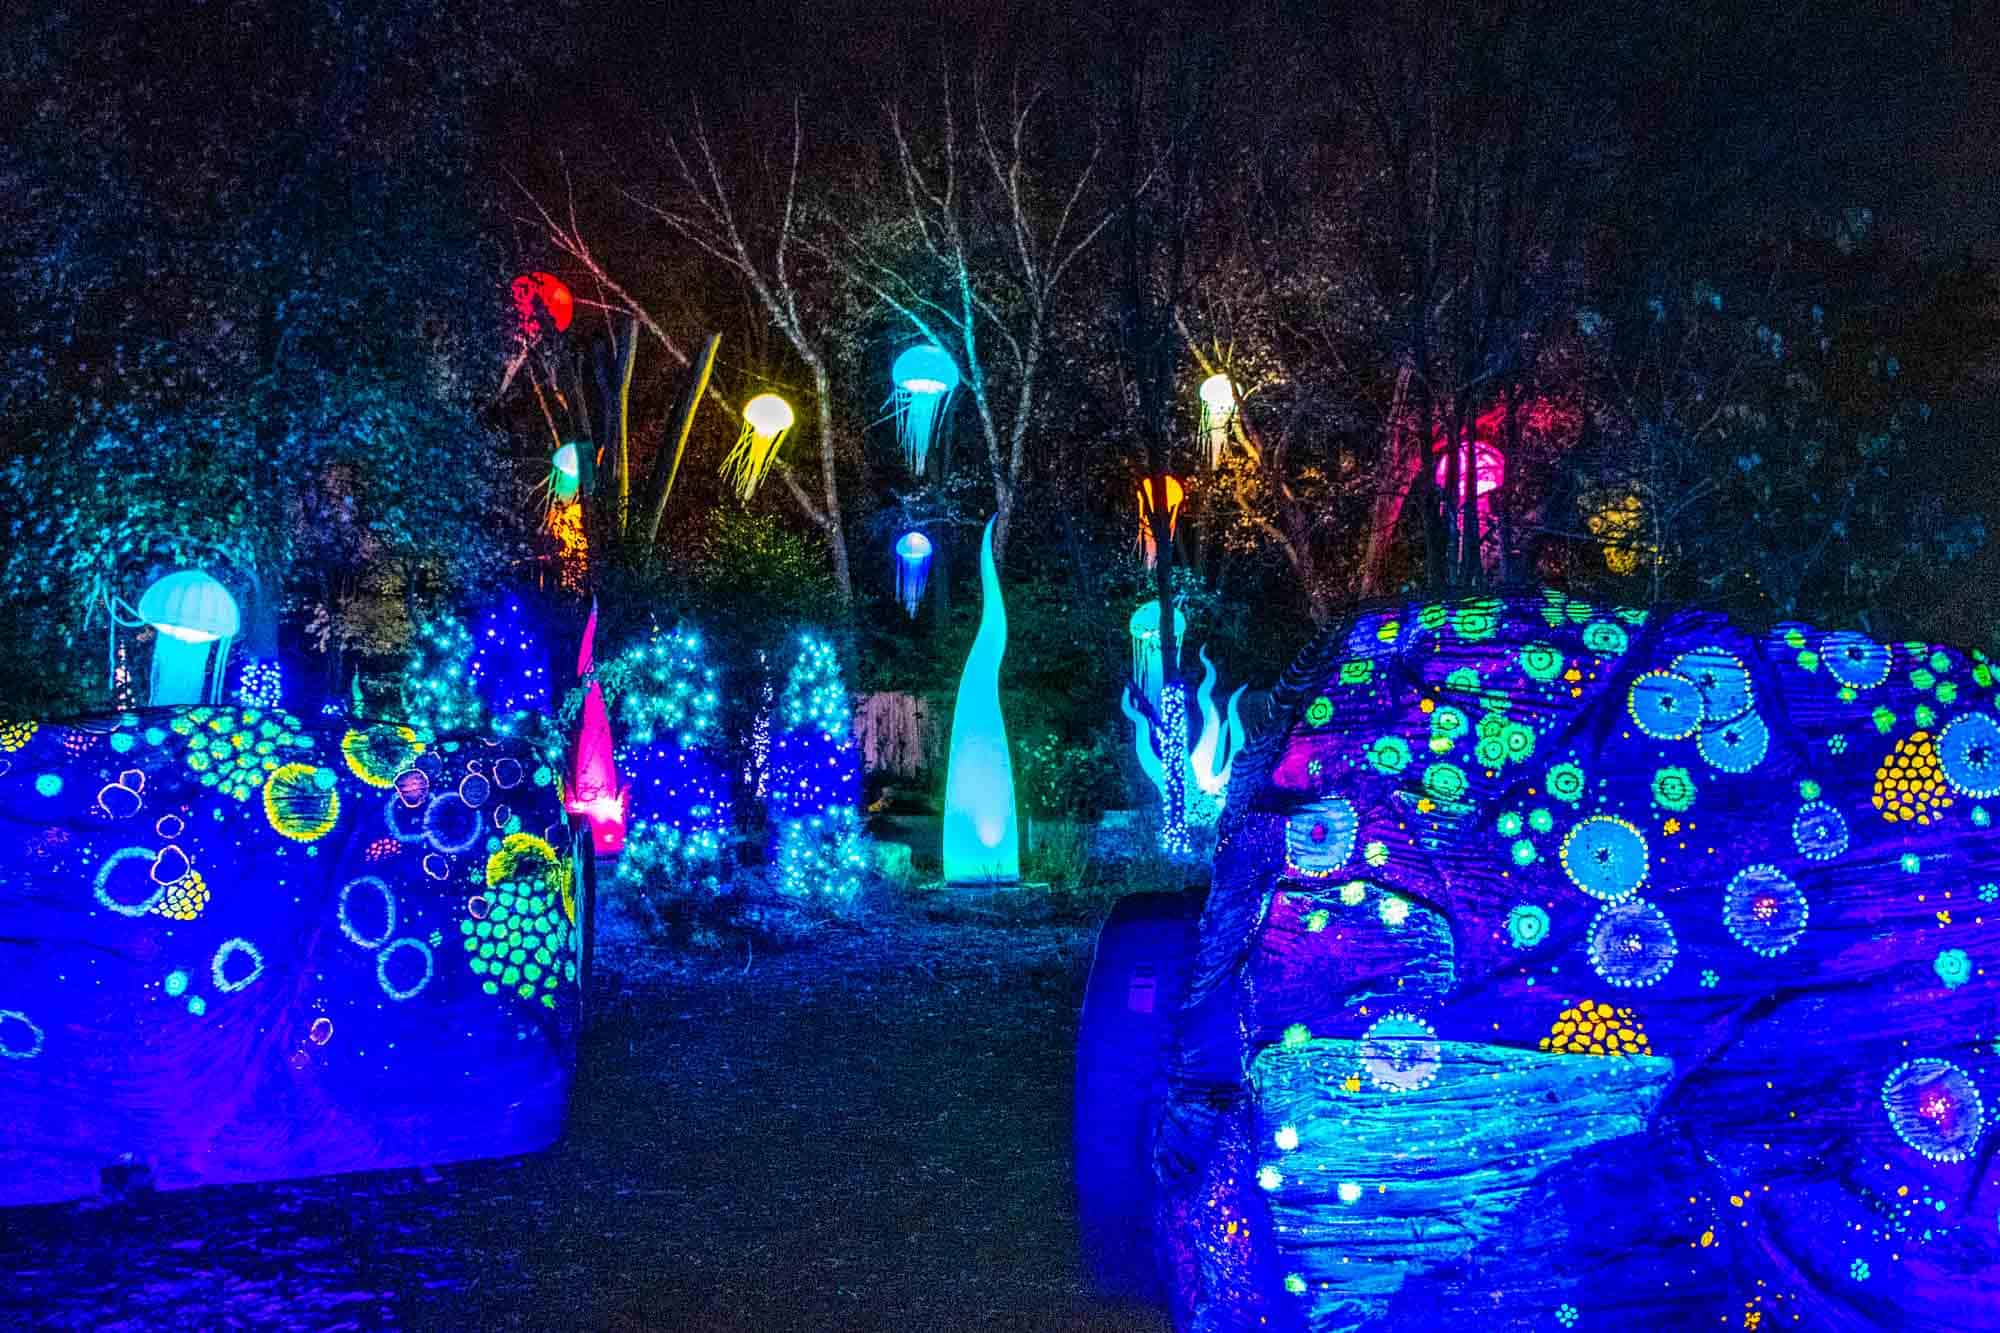 Rocks glowing in blacklights with large illuminated jellyfish in the background.